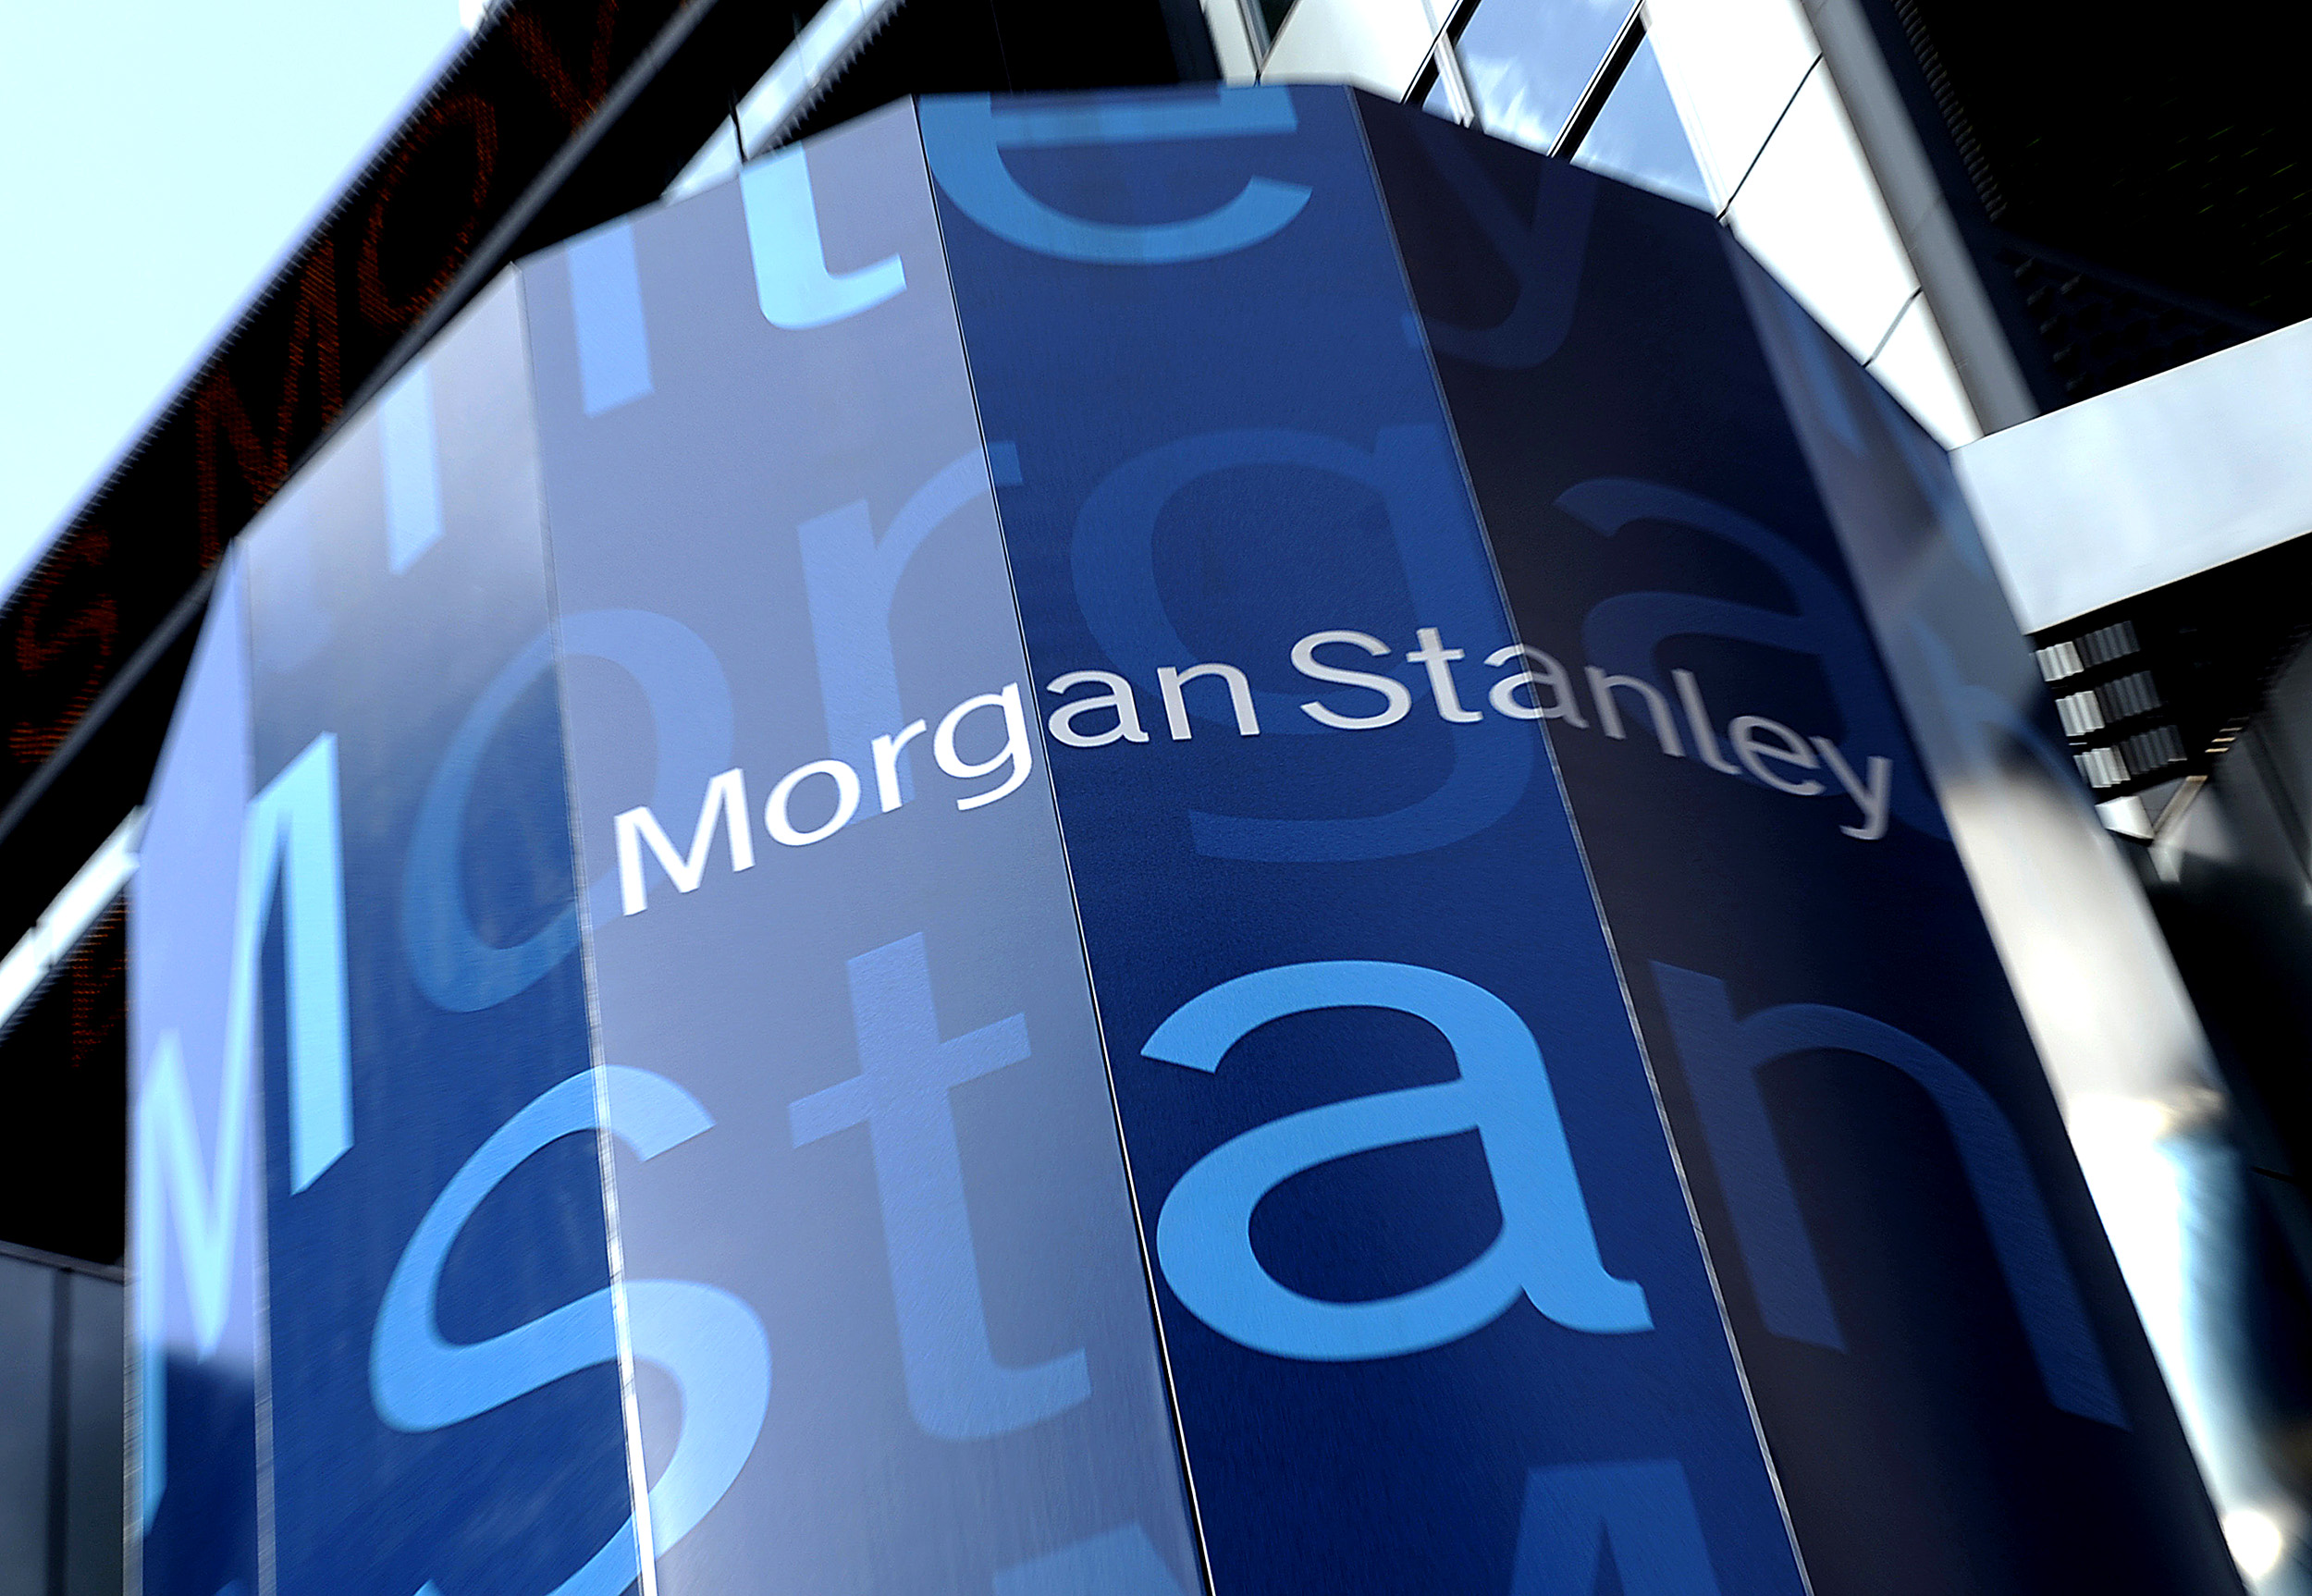 The Morgan Stanley headquarters in New York.
